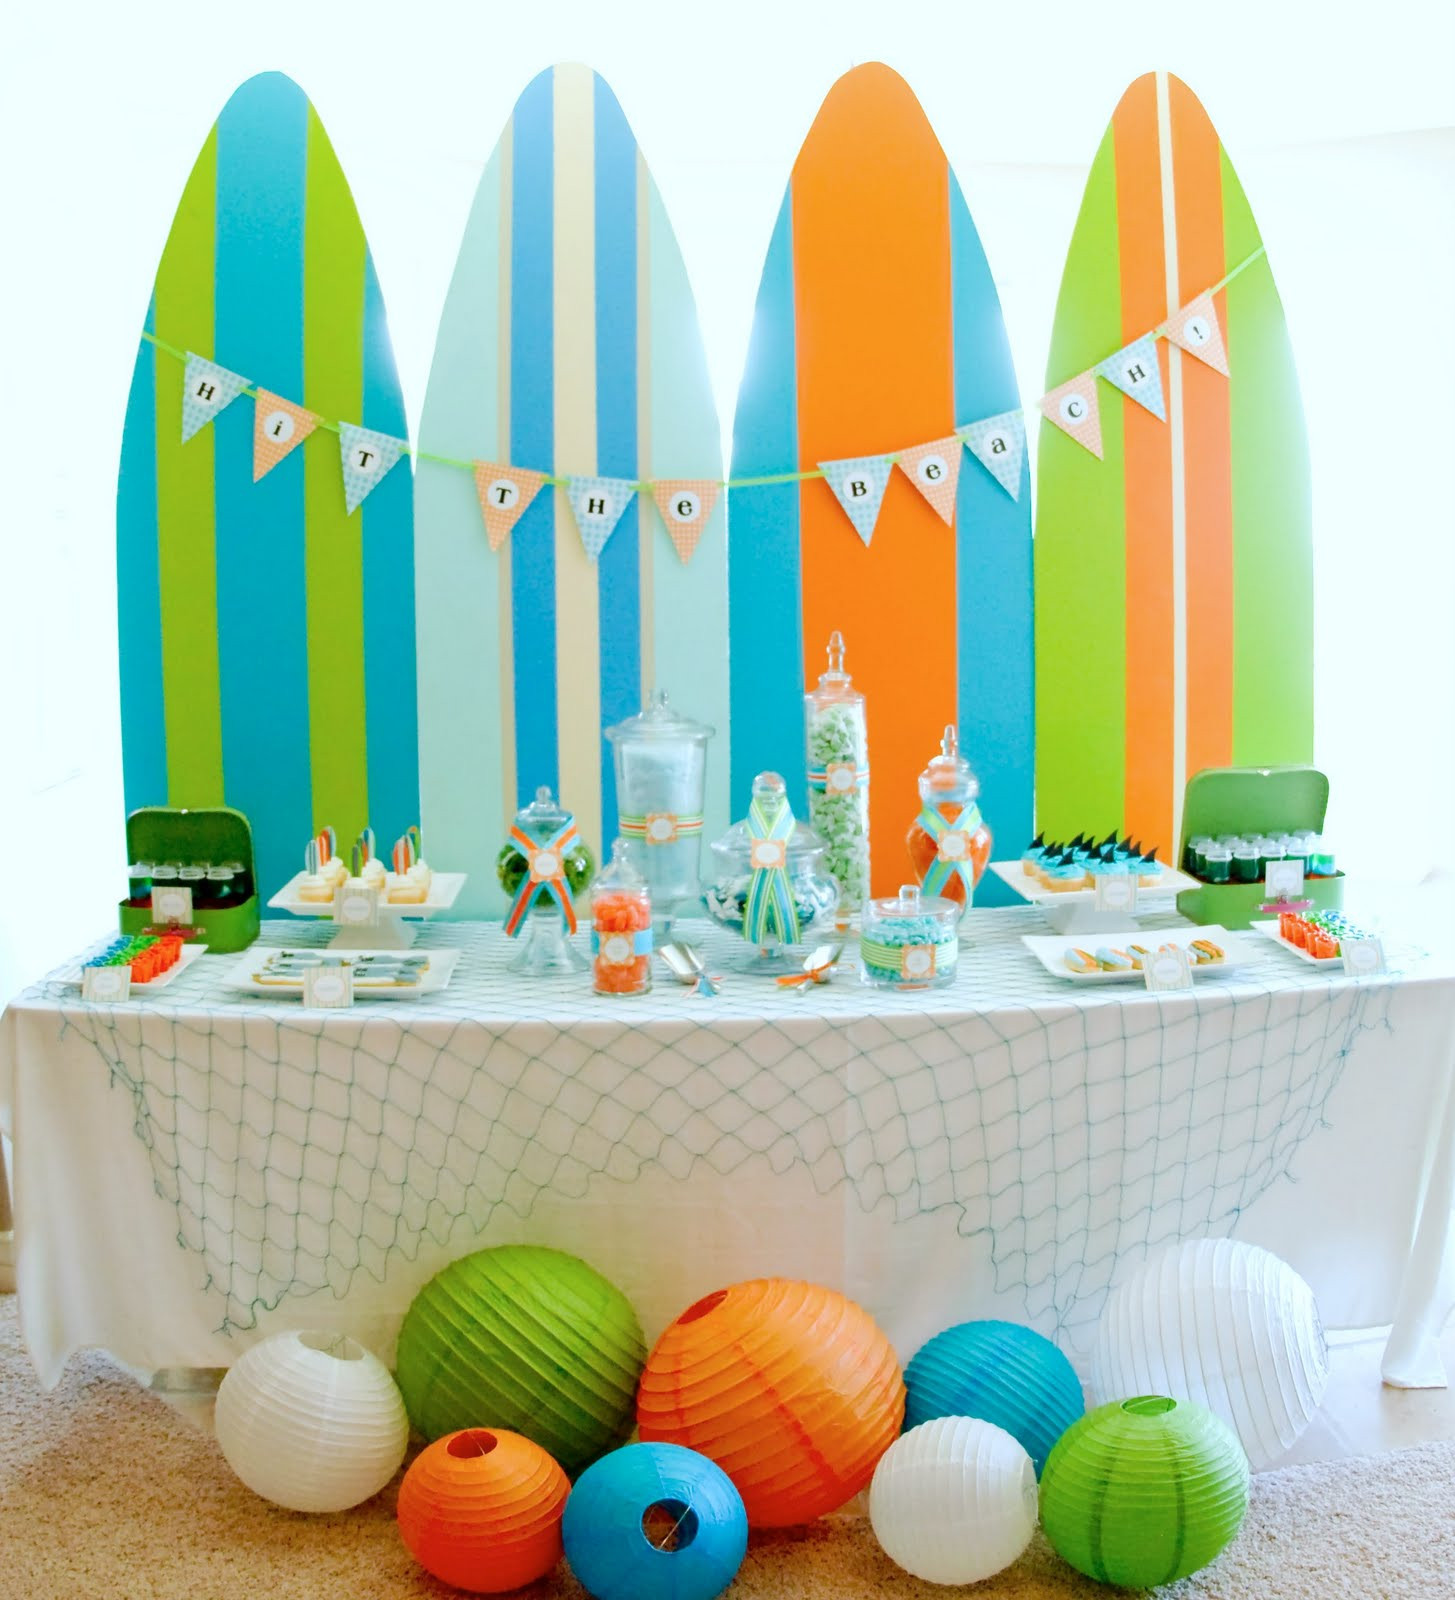 Summer Themed Party Ideas
 Kara s Party Ideas Surf s Up Summer Pool Party